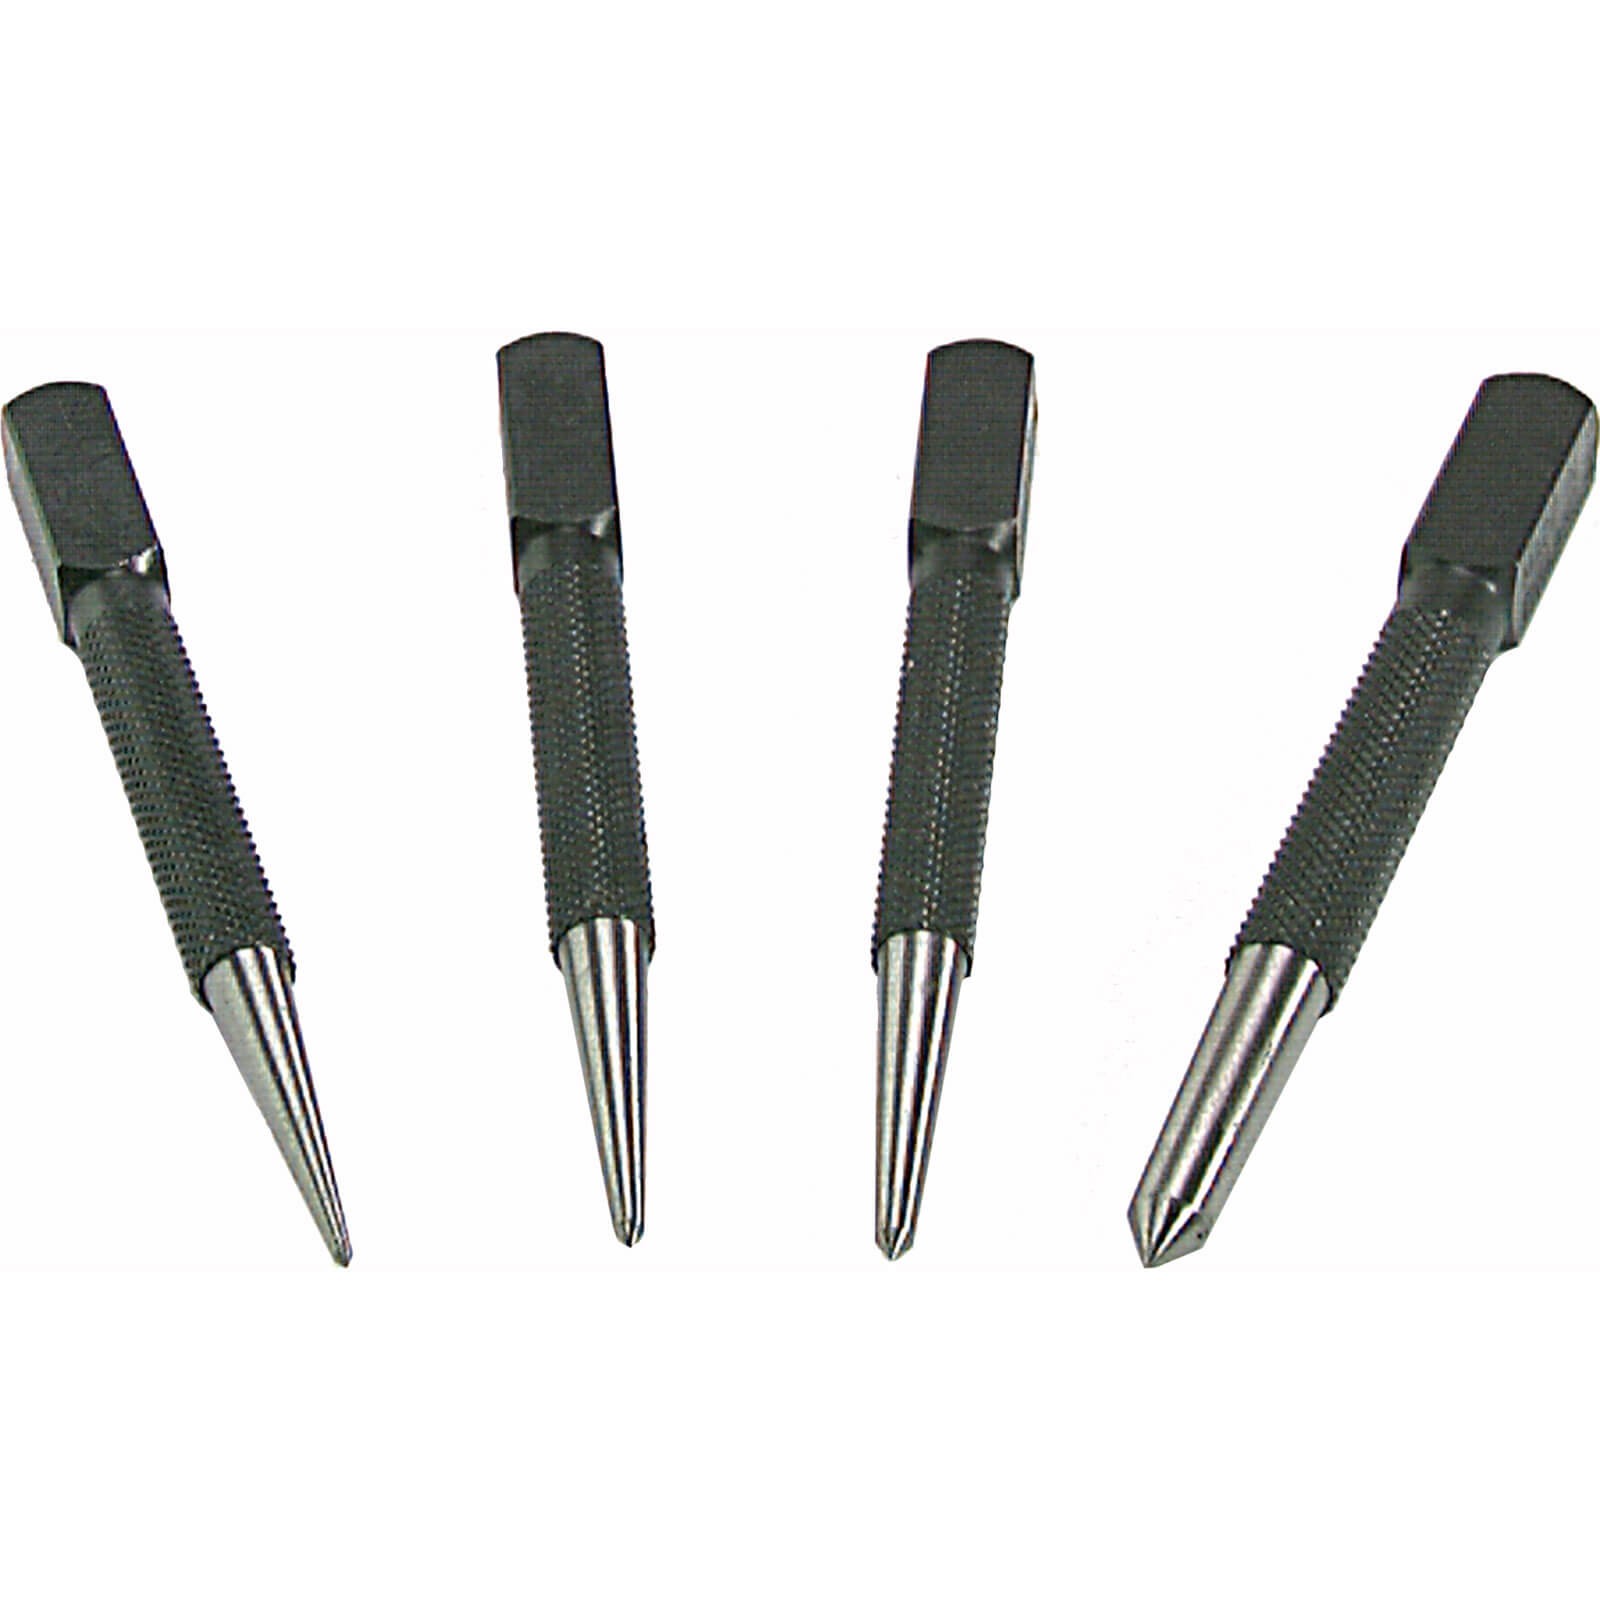 Image of Priory 4 Piece Centre Punch Set